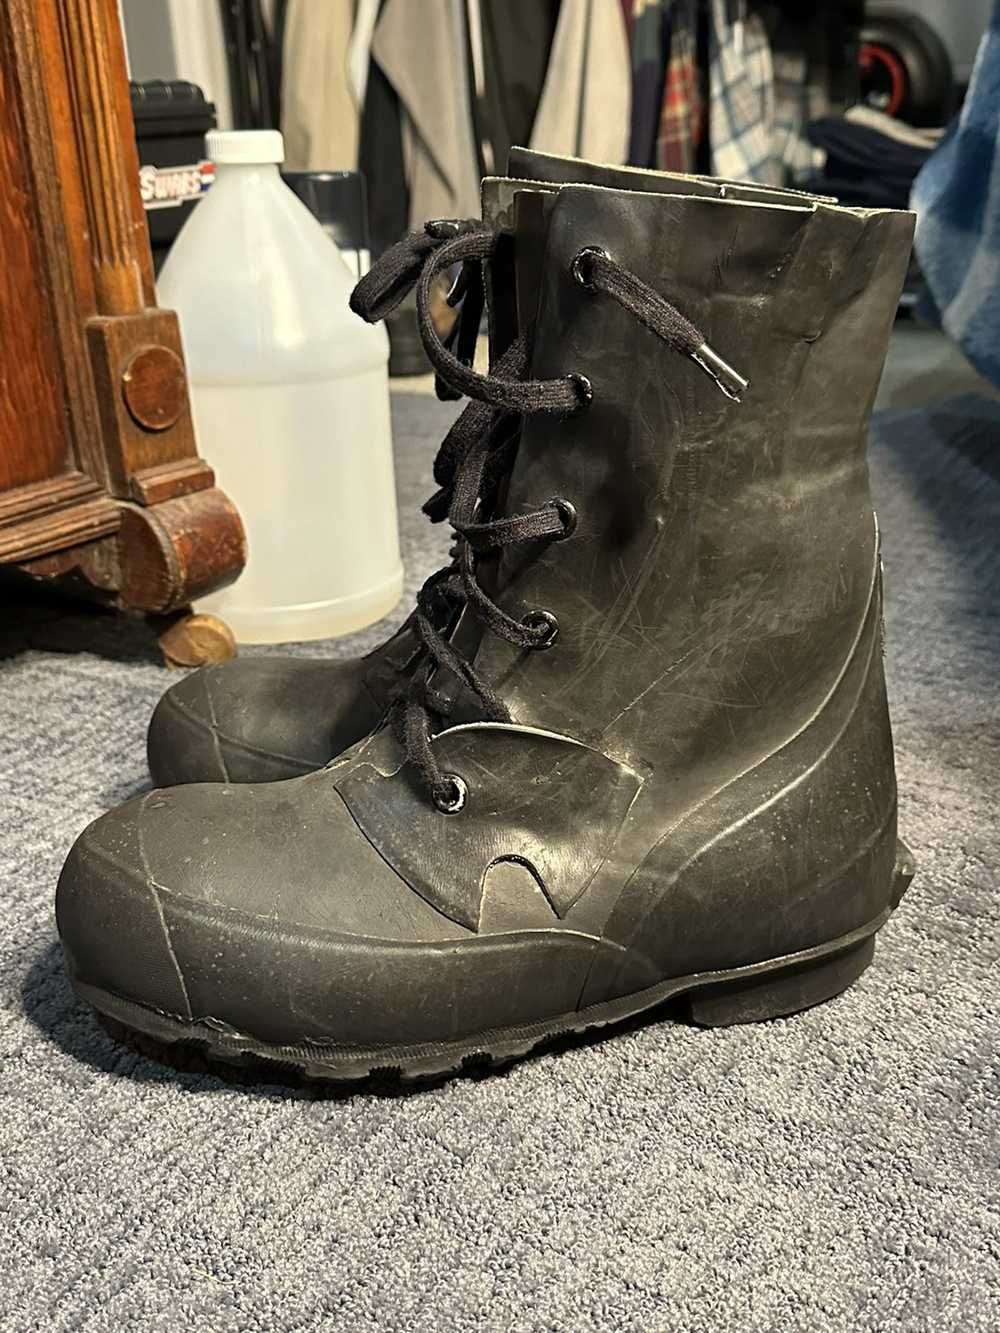 Other military water proof boots - image 2